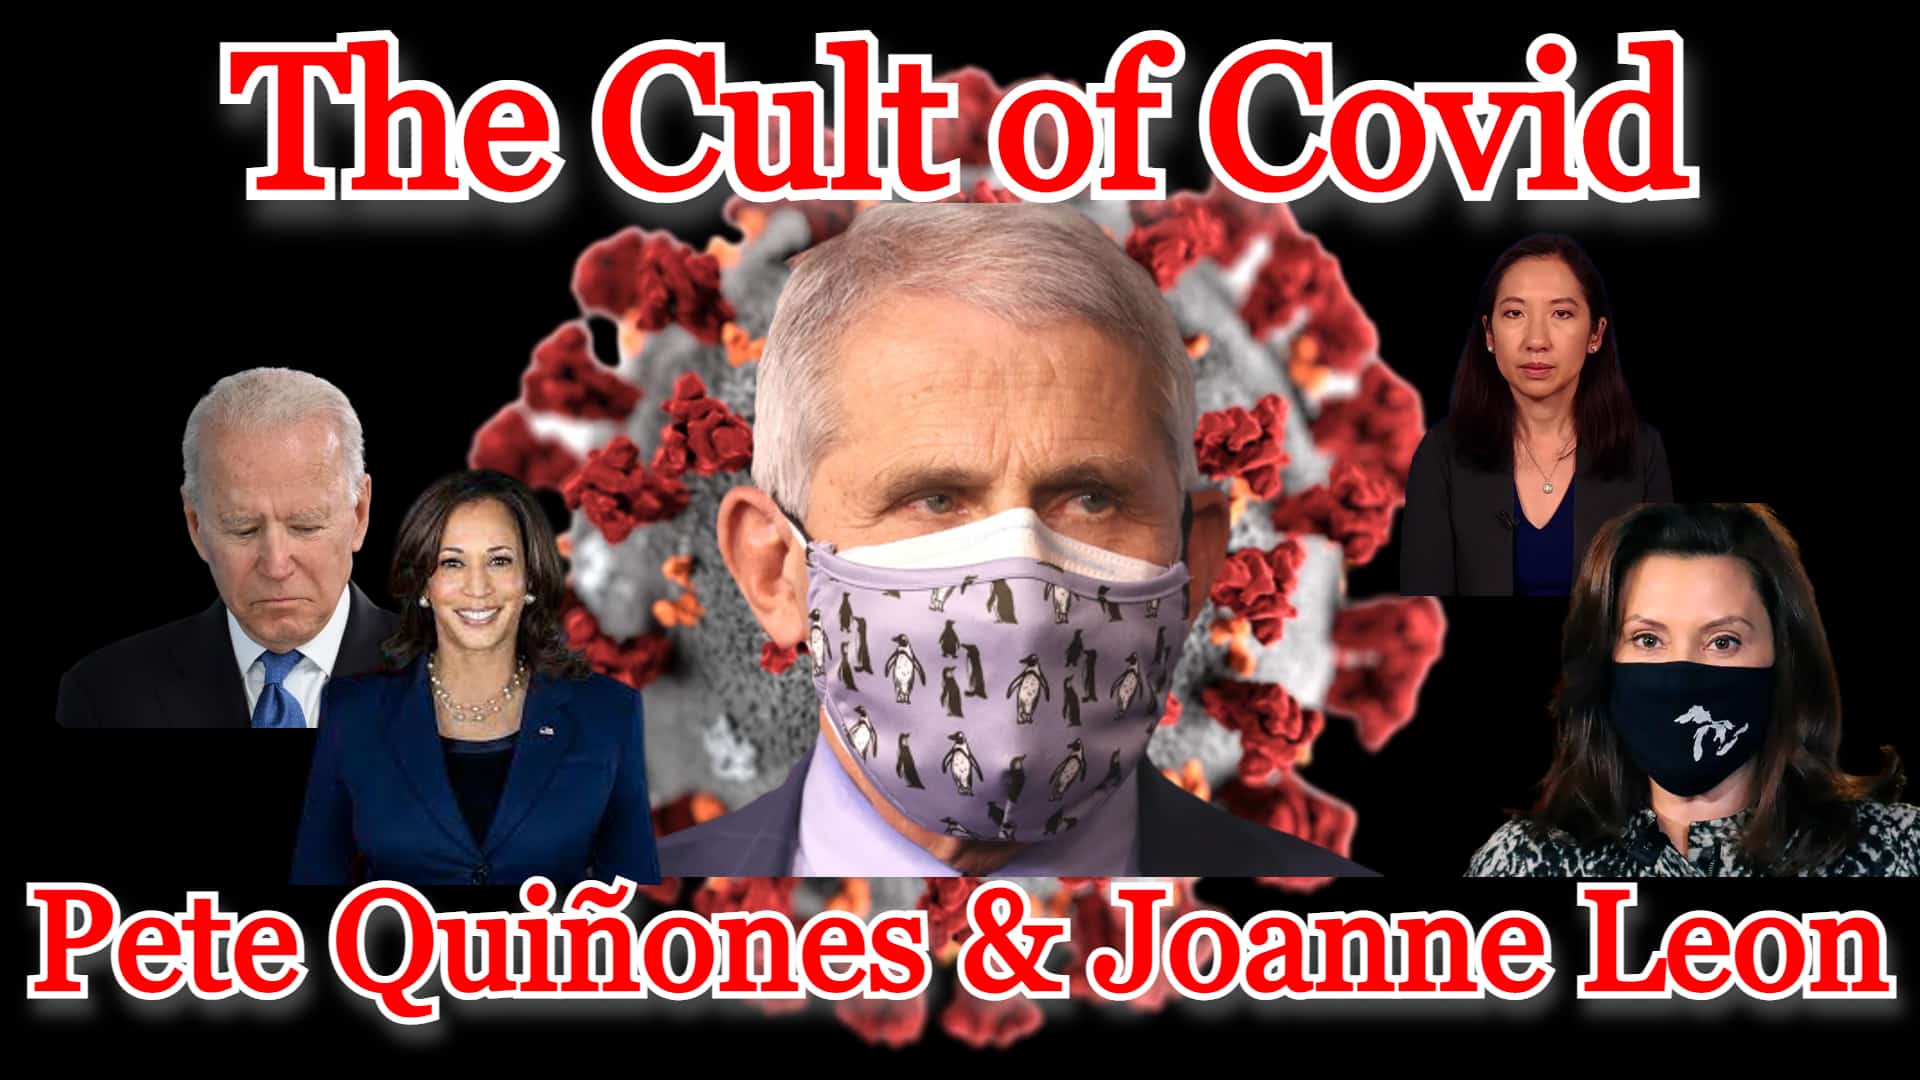 COI #181: Taking on the Covid Cult guests Pete Quiñones & Joanne Leon